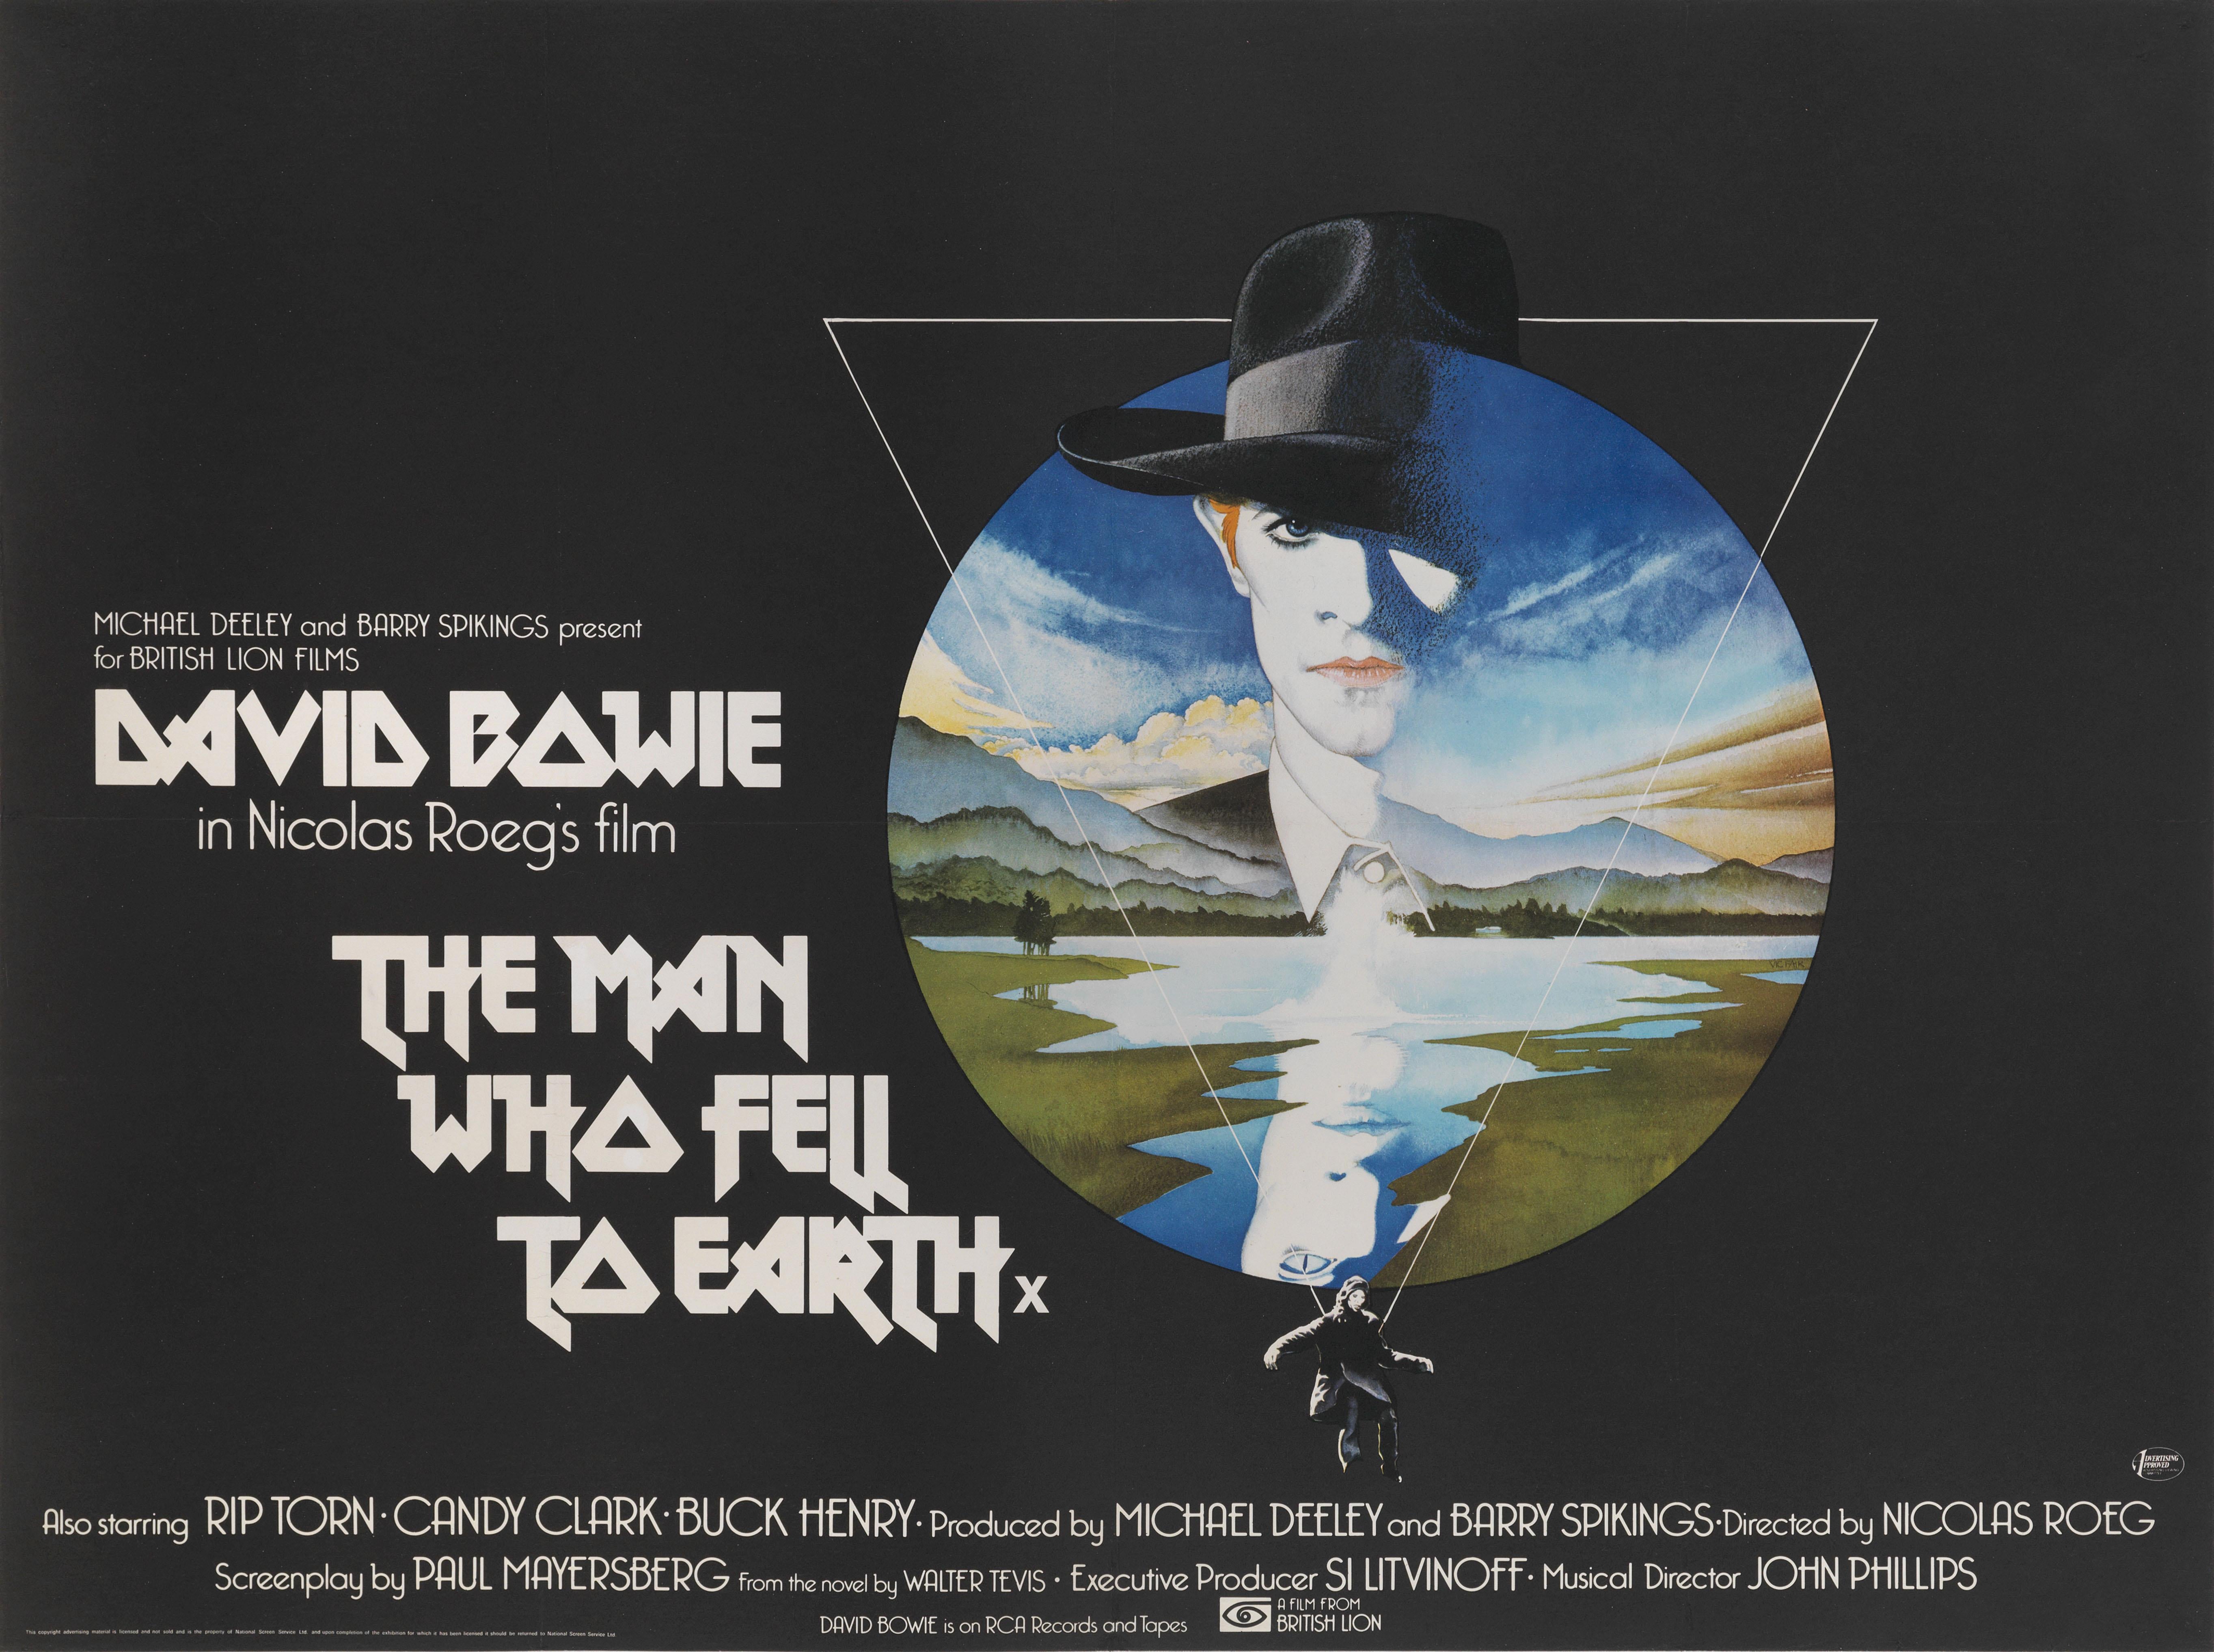 British The Man Who Fell to Earth